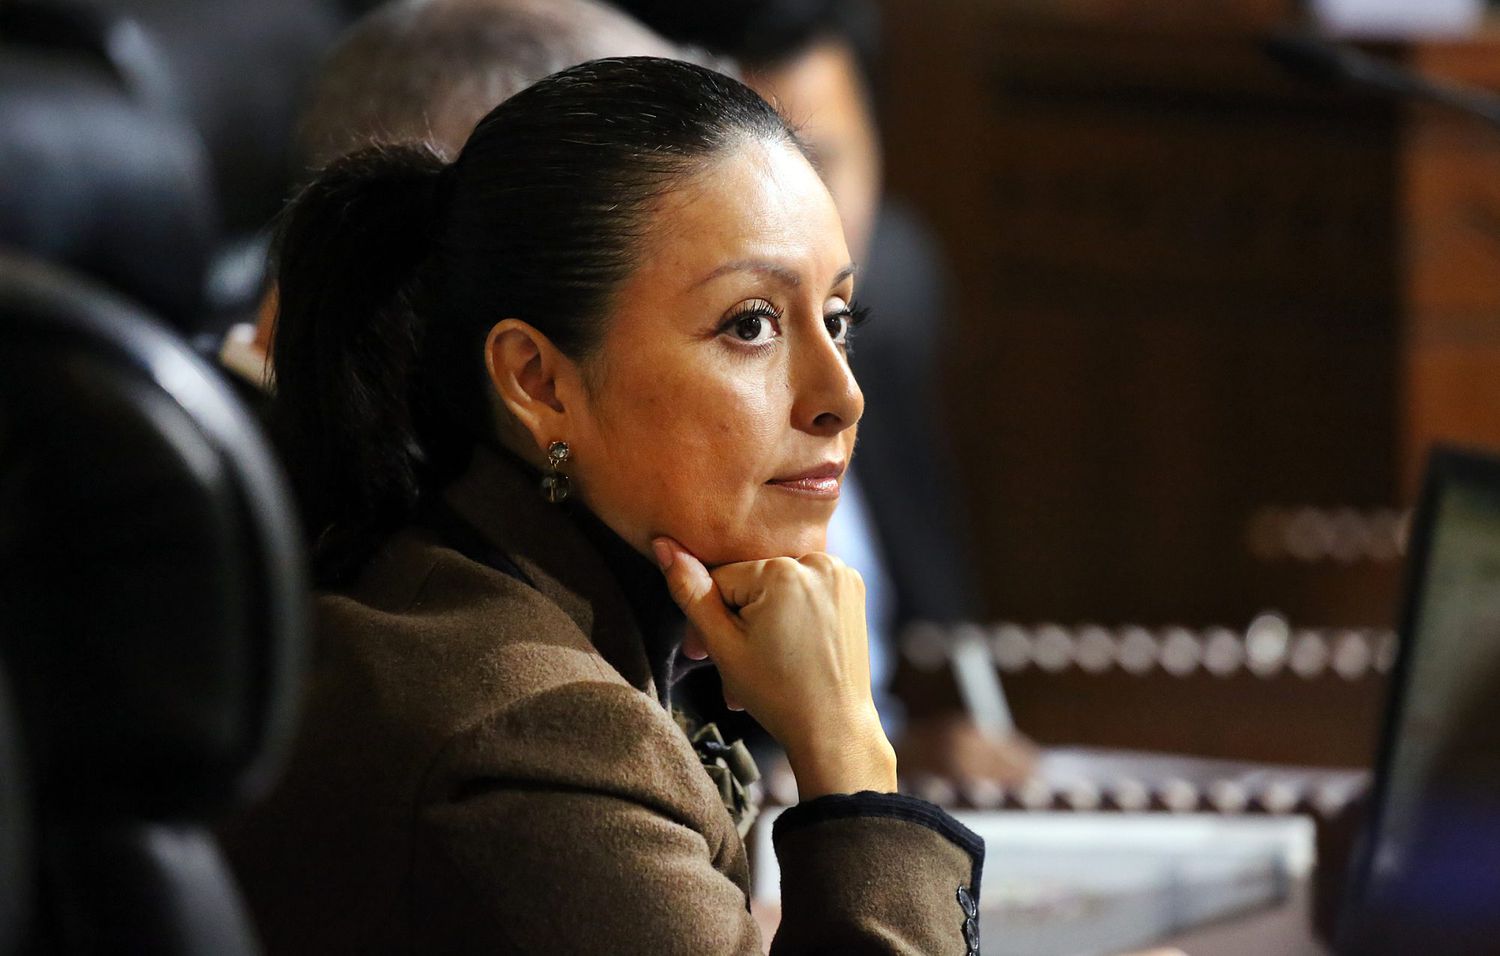 L.A. City Council President Nury Martinez Takes Leave of Absence After Leaked Audio of Racist Remarks